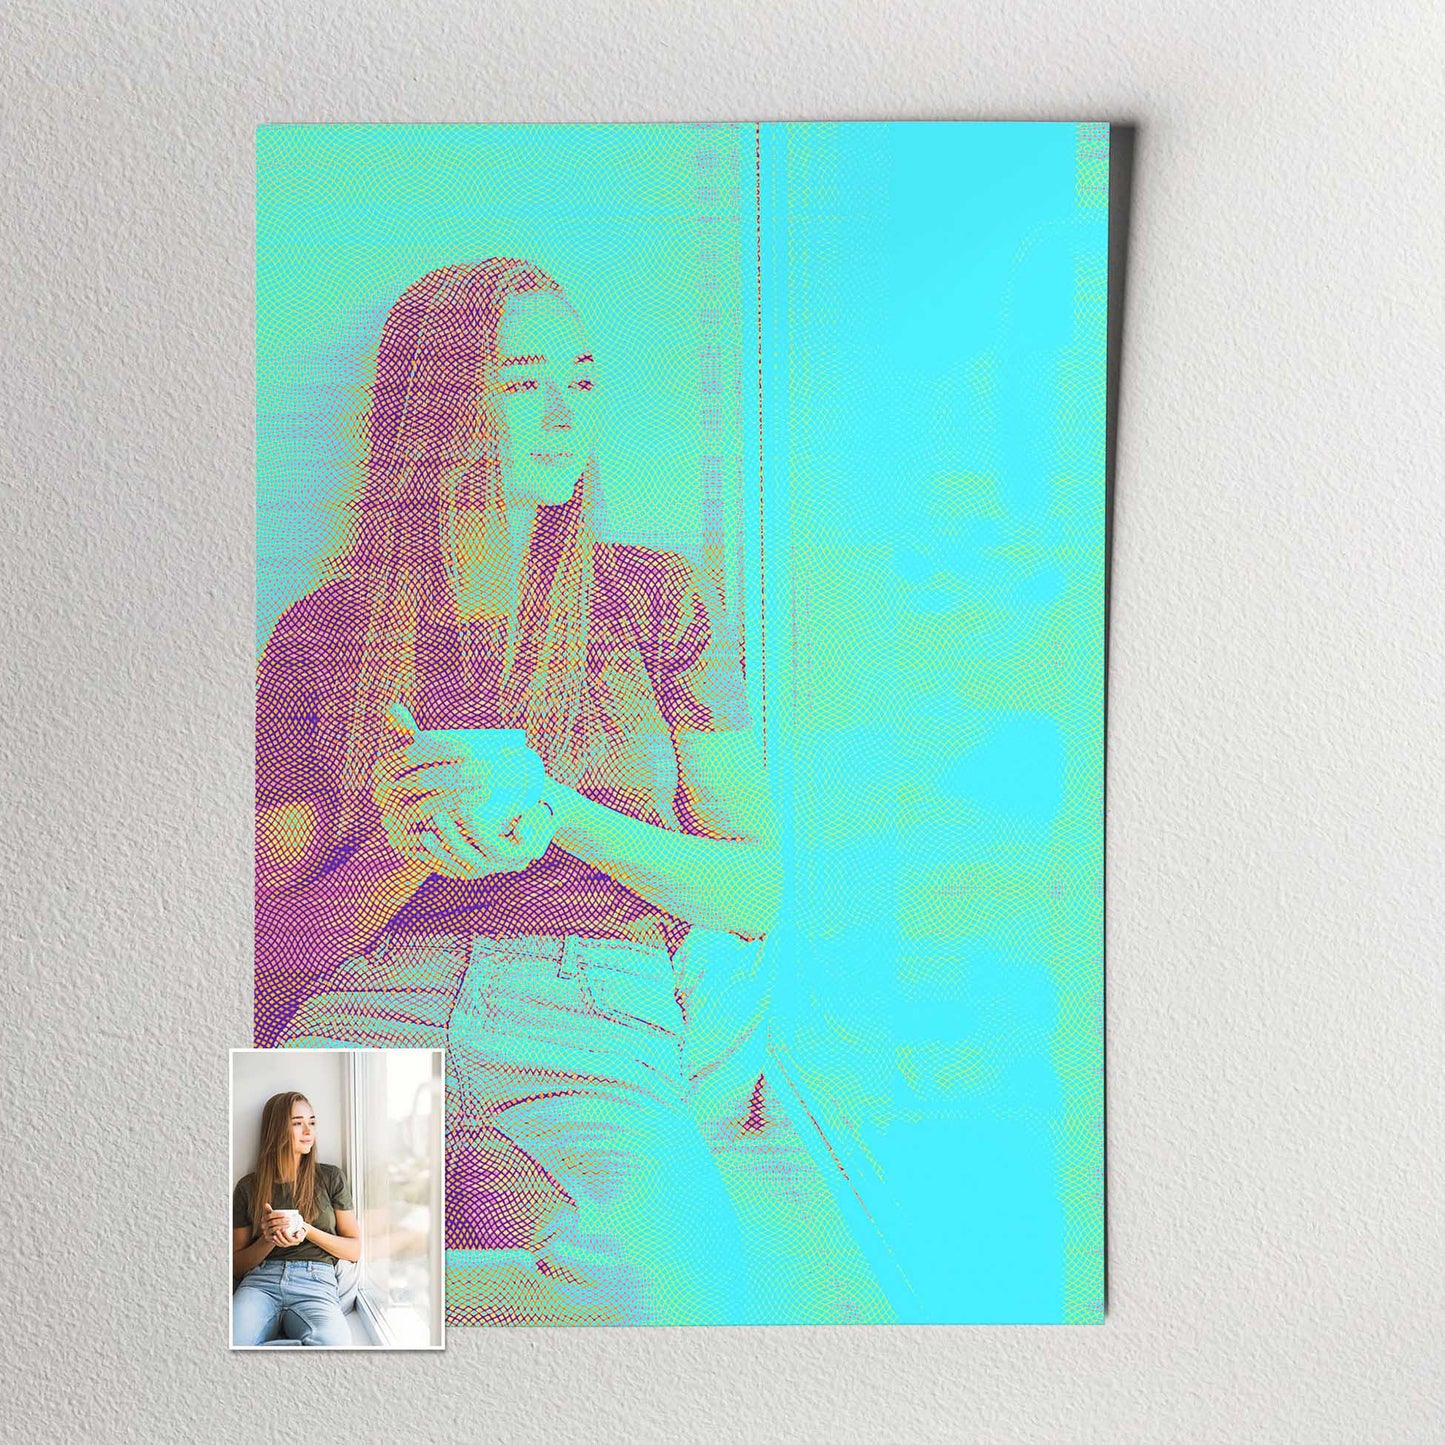 Elevate your home decor with a Personalised Blue Engraved Print, showcasing a bad print effect that exudes coolness and edginess. The blue hue and creative texture bring a fresh and artistic look, adding a fun and happy vibe to any space